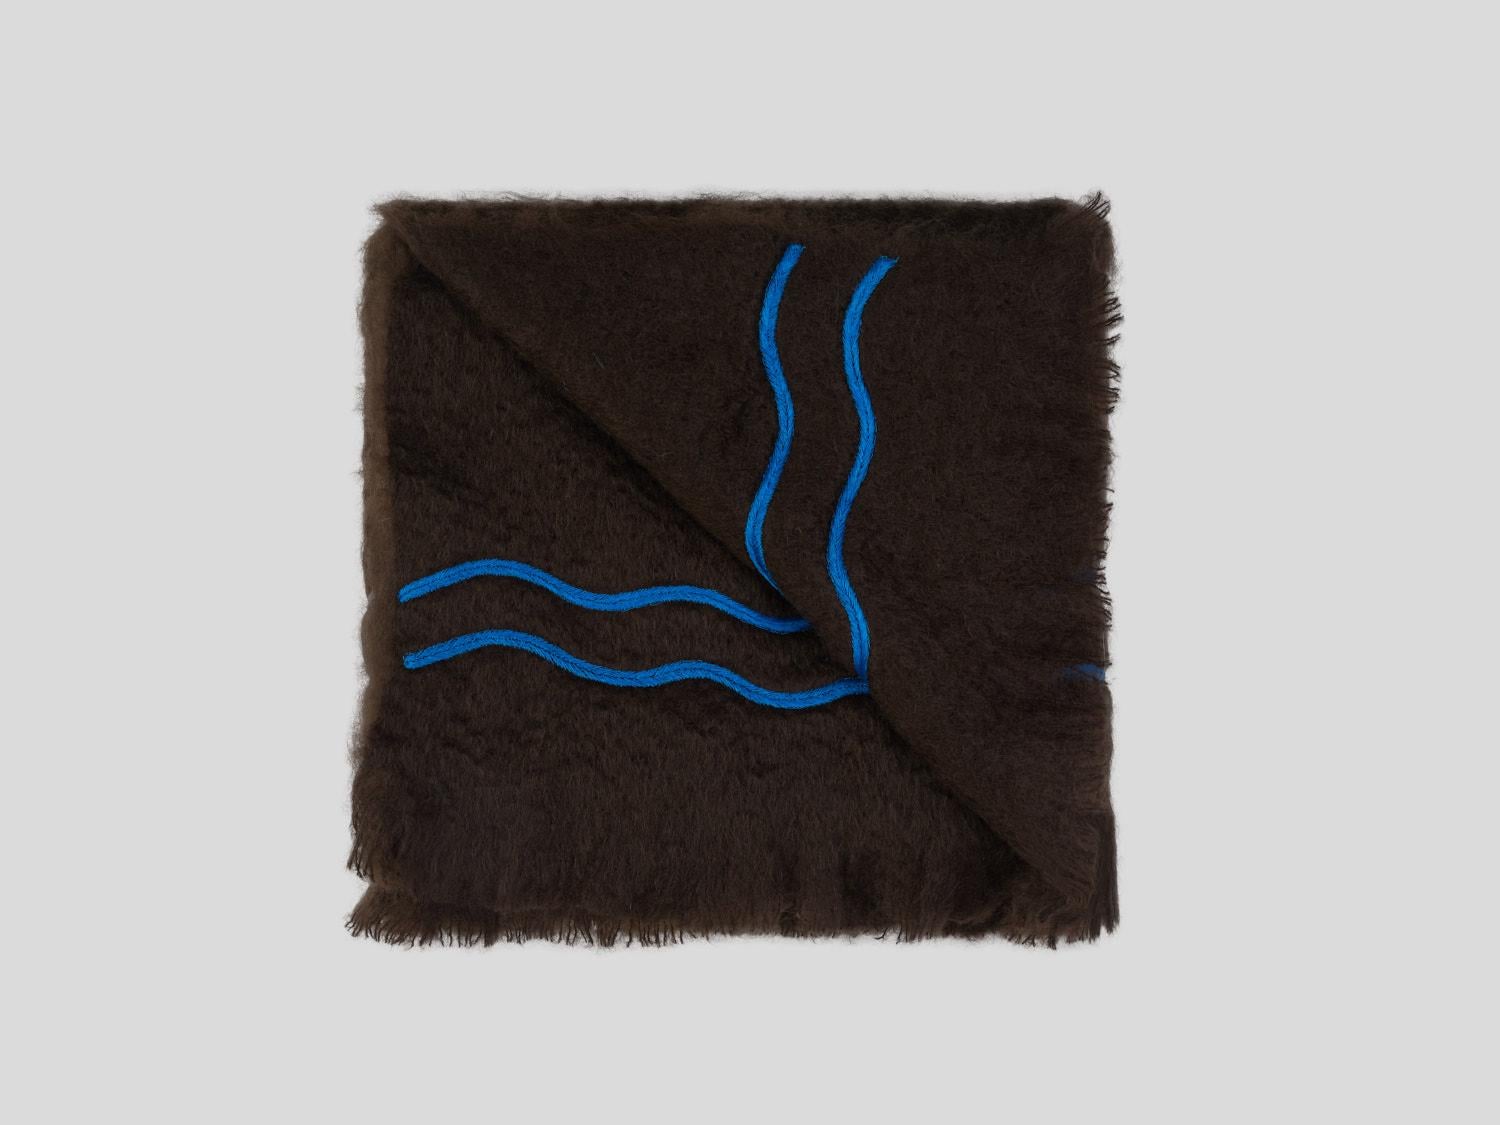 Suter, a graphic brown blanket made of the finest New Zealand mohair. This throw is embellished with bright blue embroidery done by hand. Nothing as personal as your own interior, the colors of the fabric and embroidery can be customized on